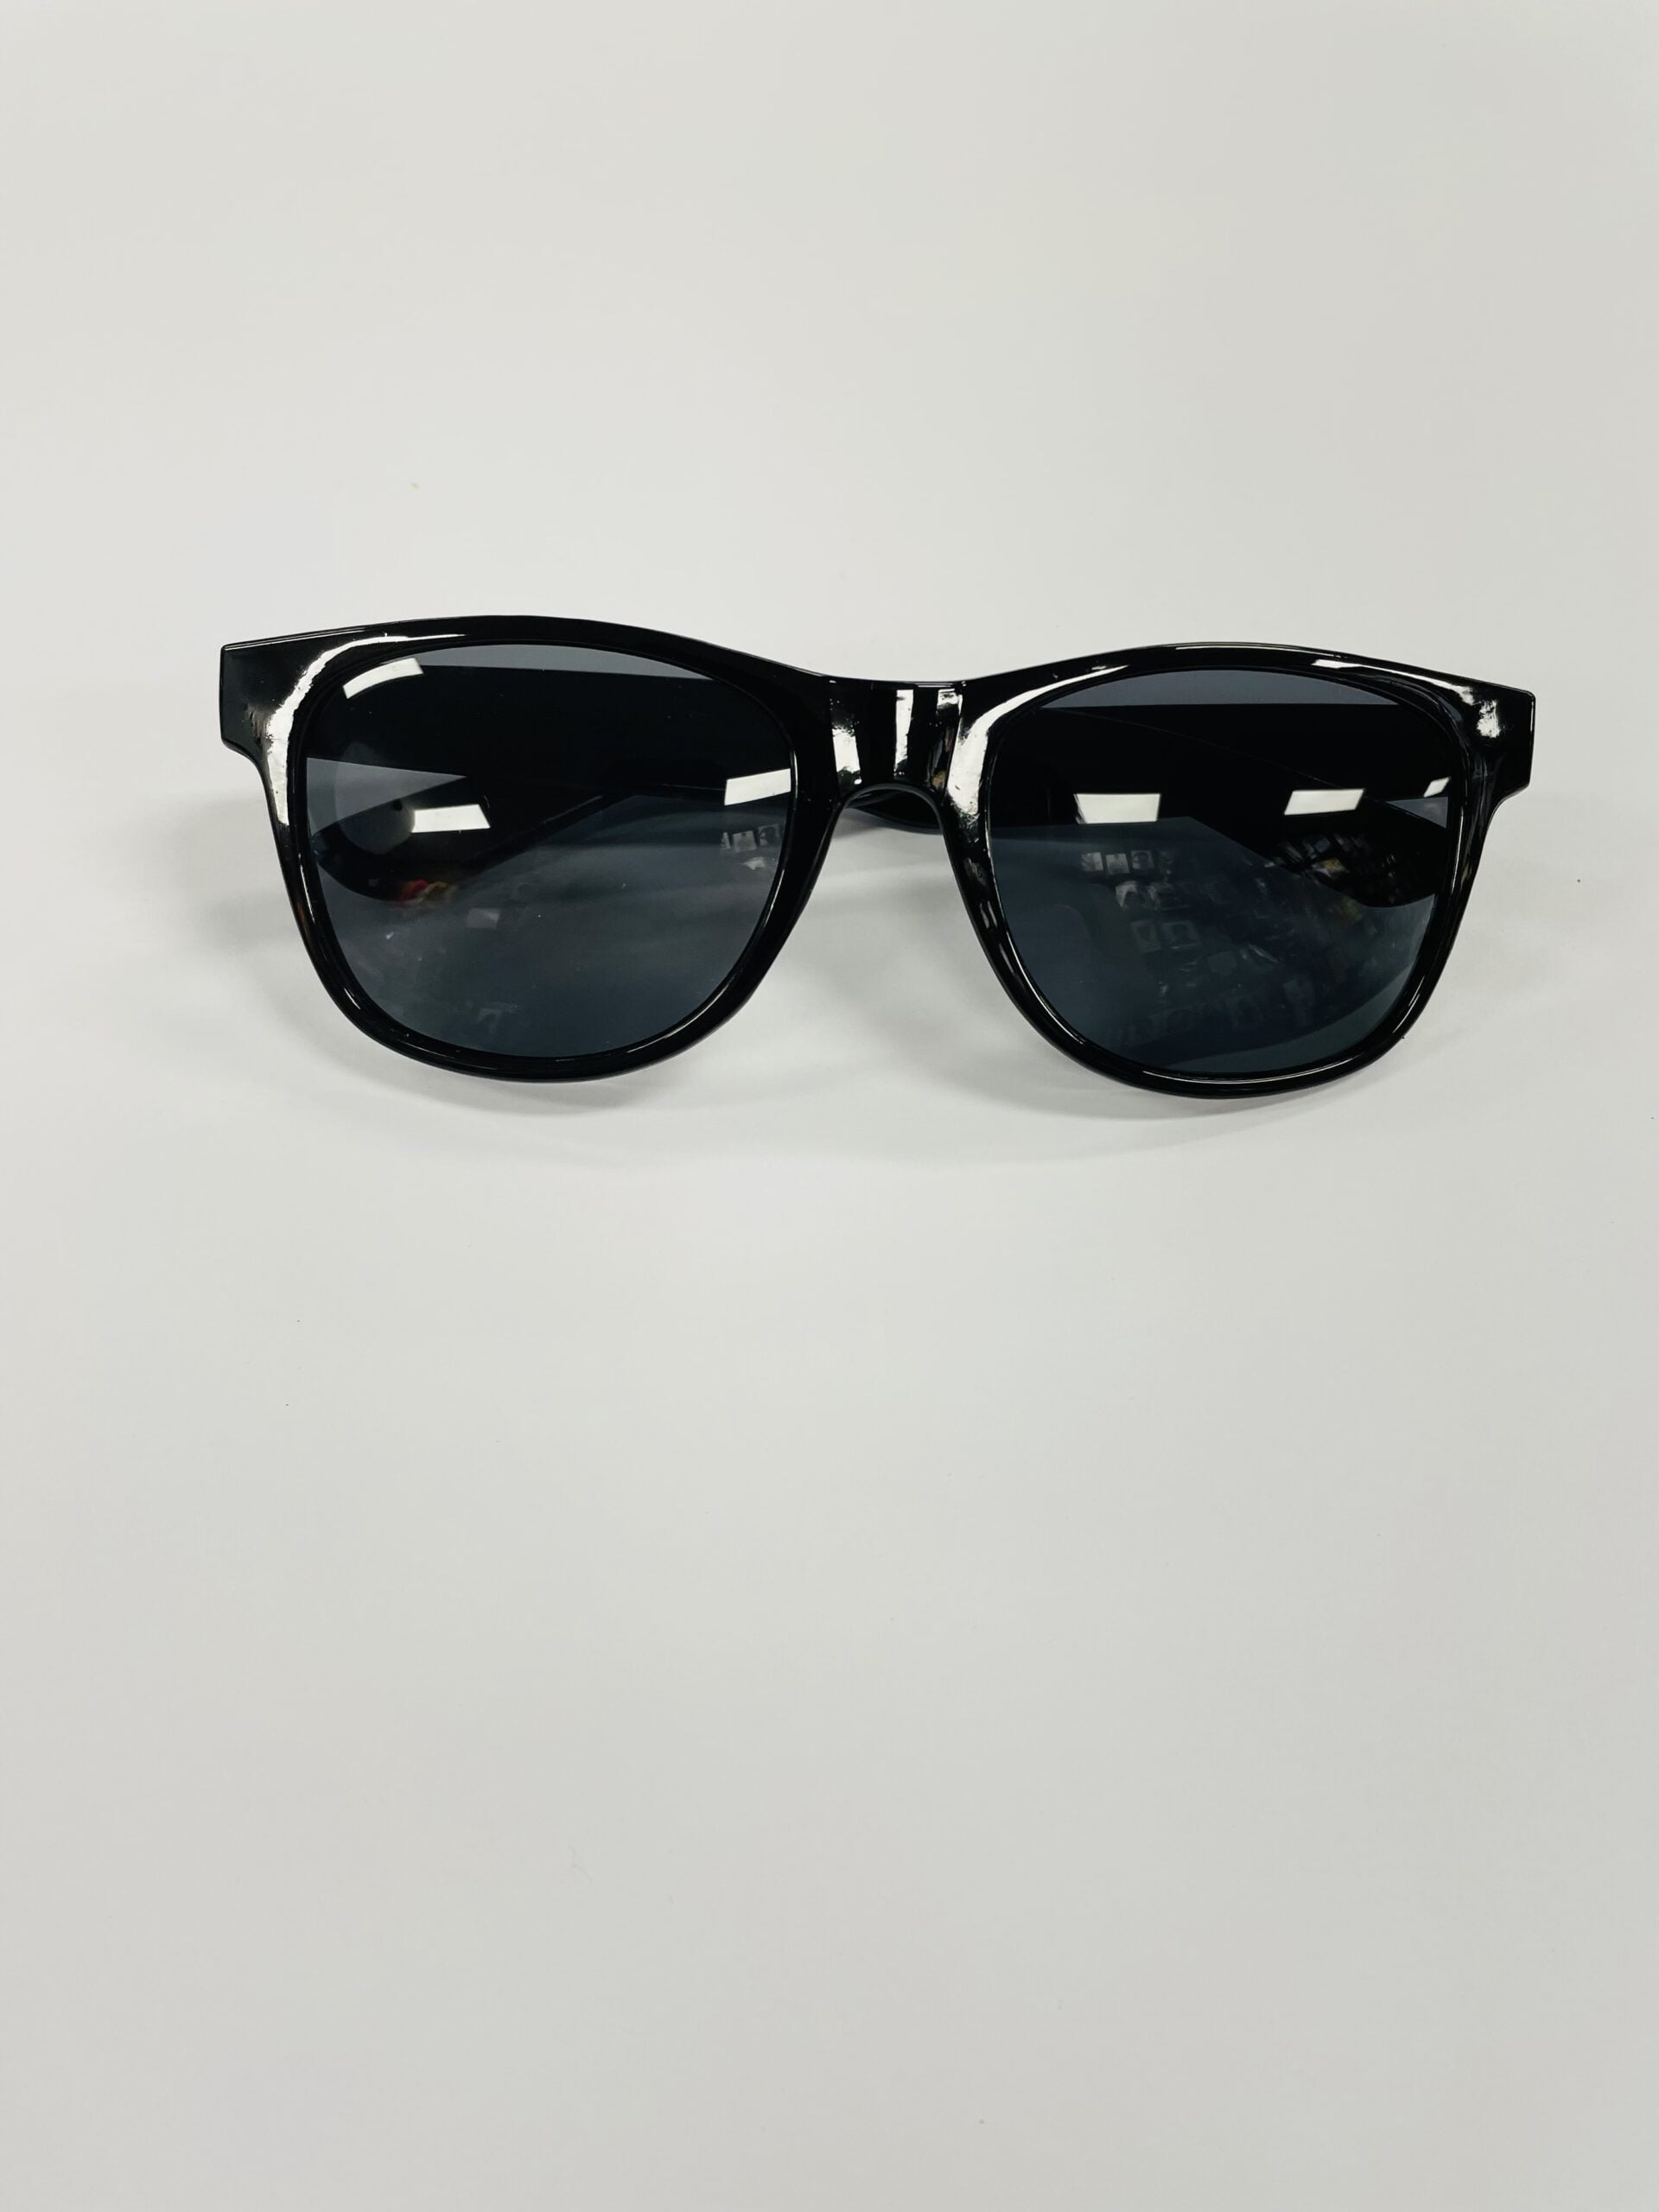 Featured image for “Ray Glasses Black”